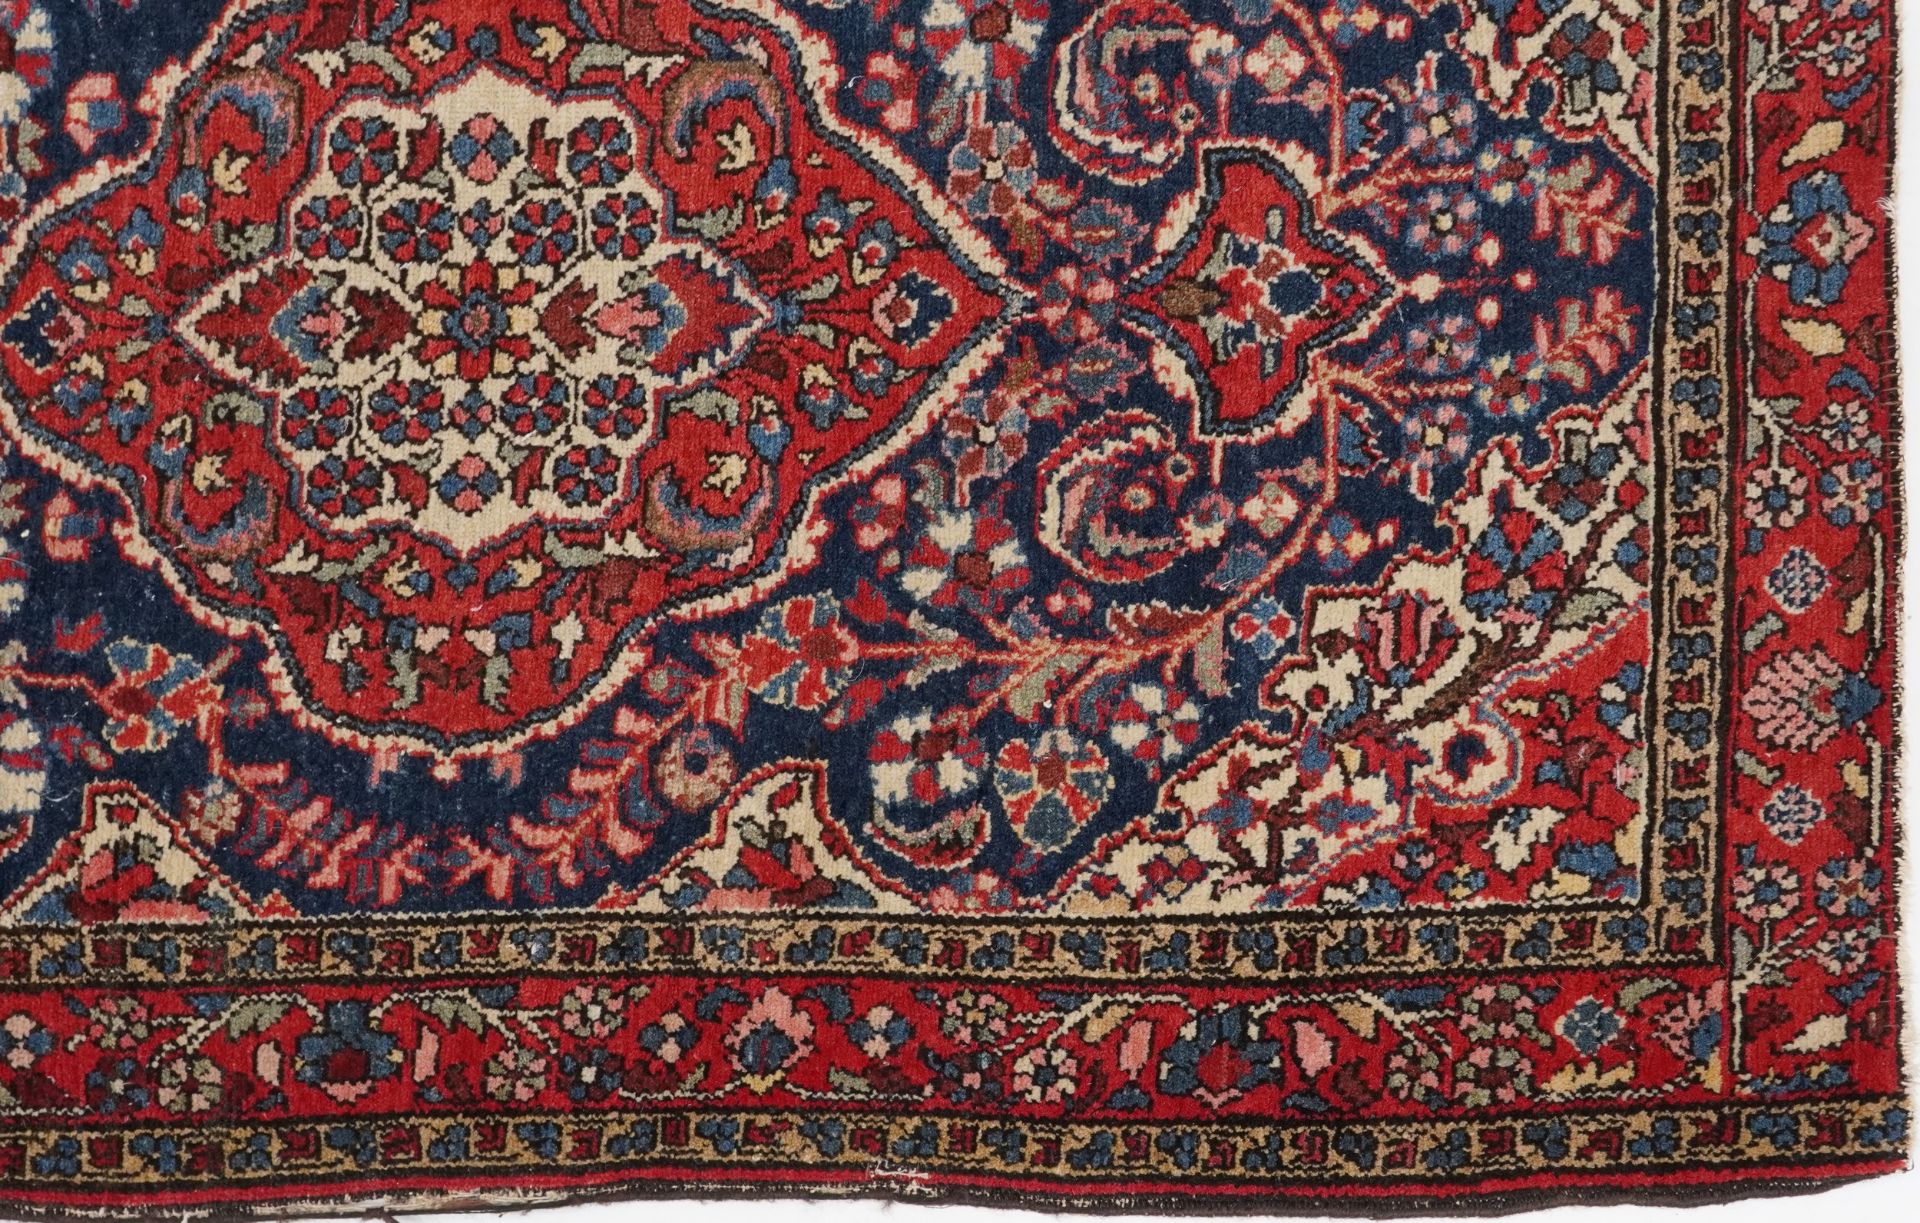 Rectangular Persian blue and red ground rug having and allover floral design, 146cm x 103cm : For - Image 5 of 5